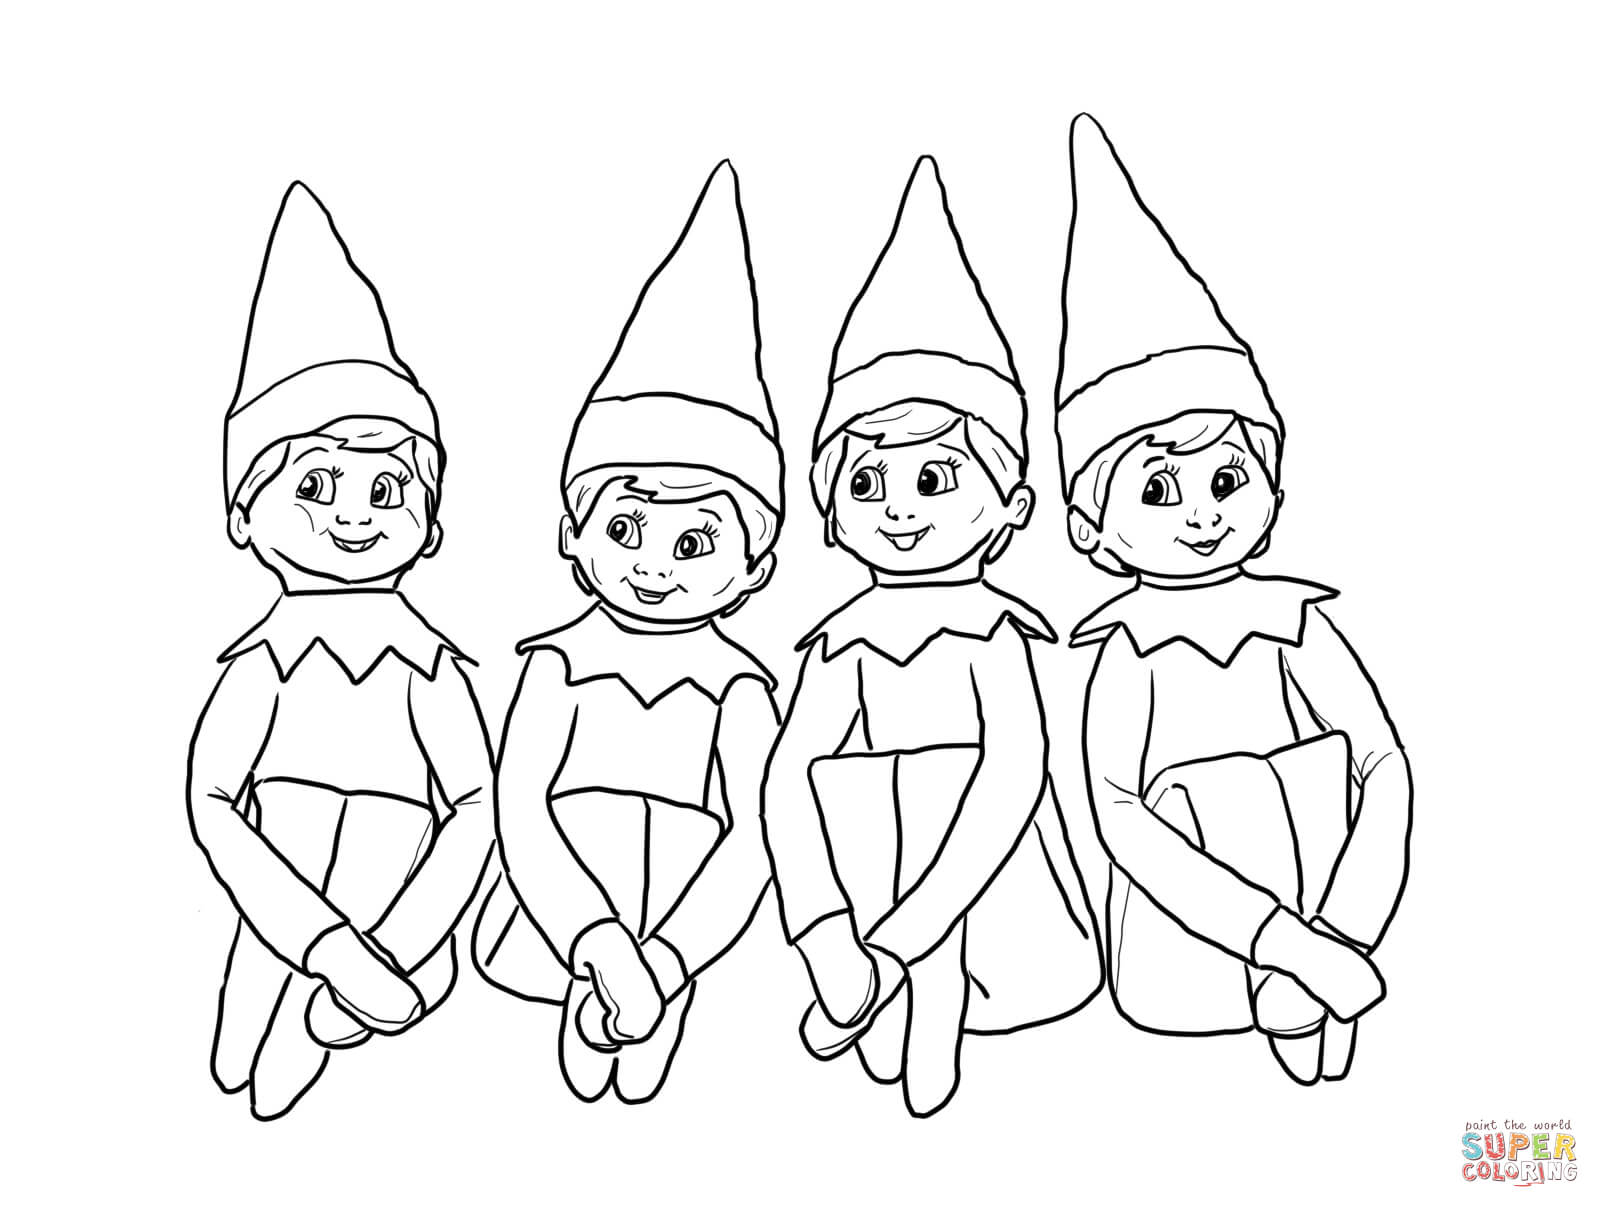 Elves on the Shelf coloring page | Free Printable Coloring Pages